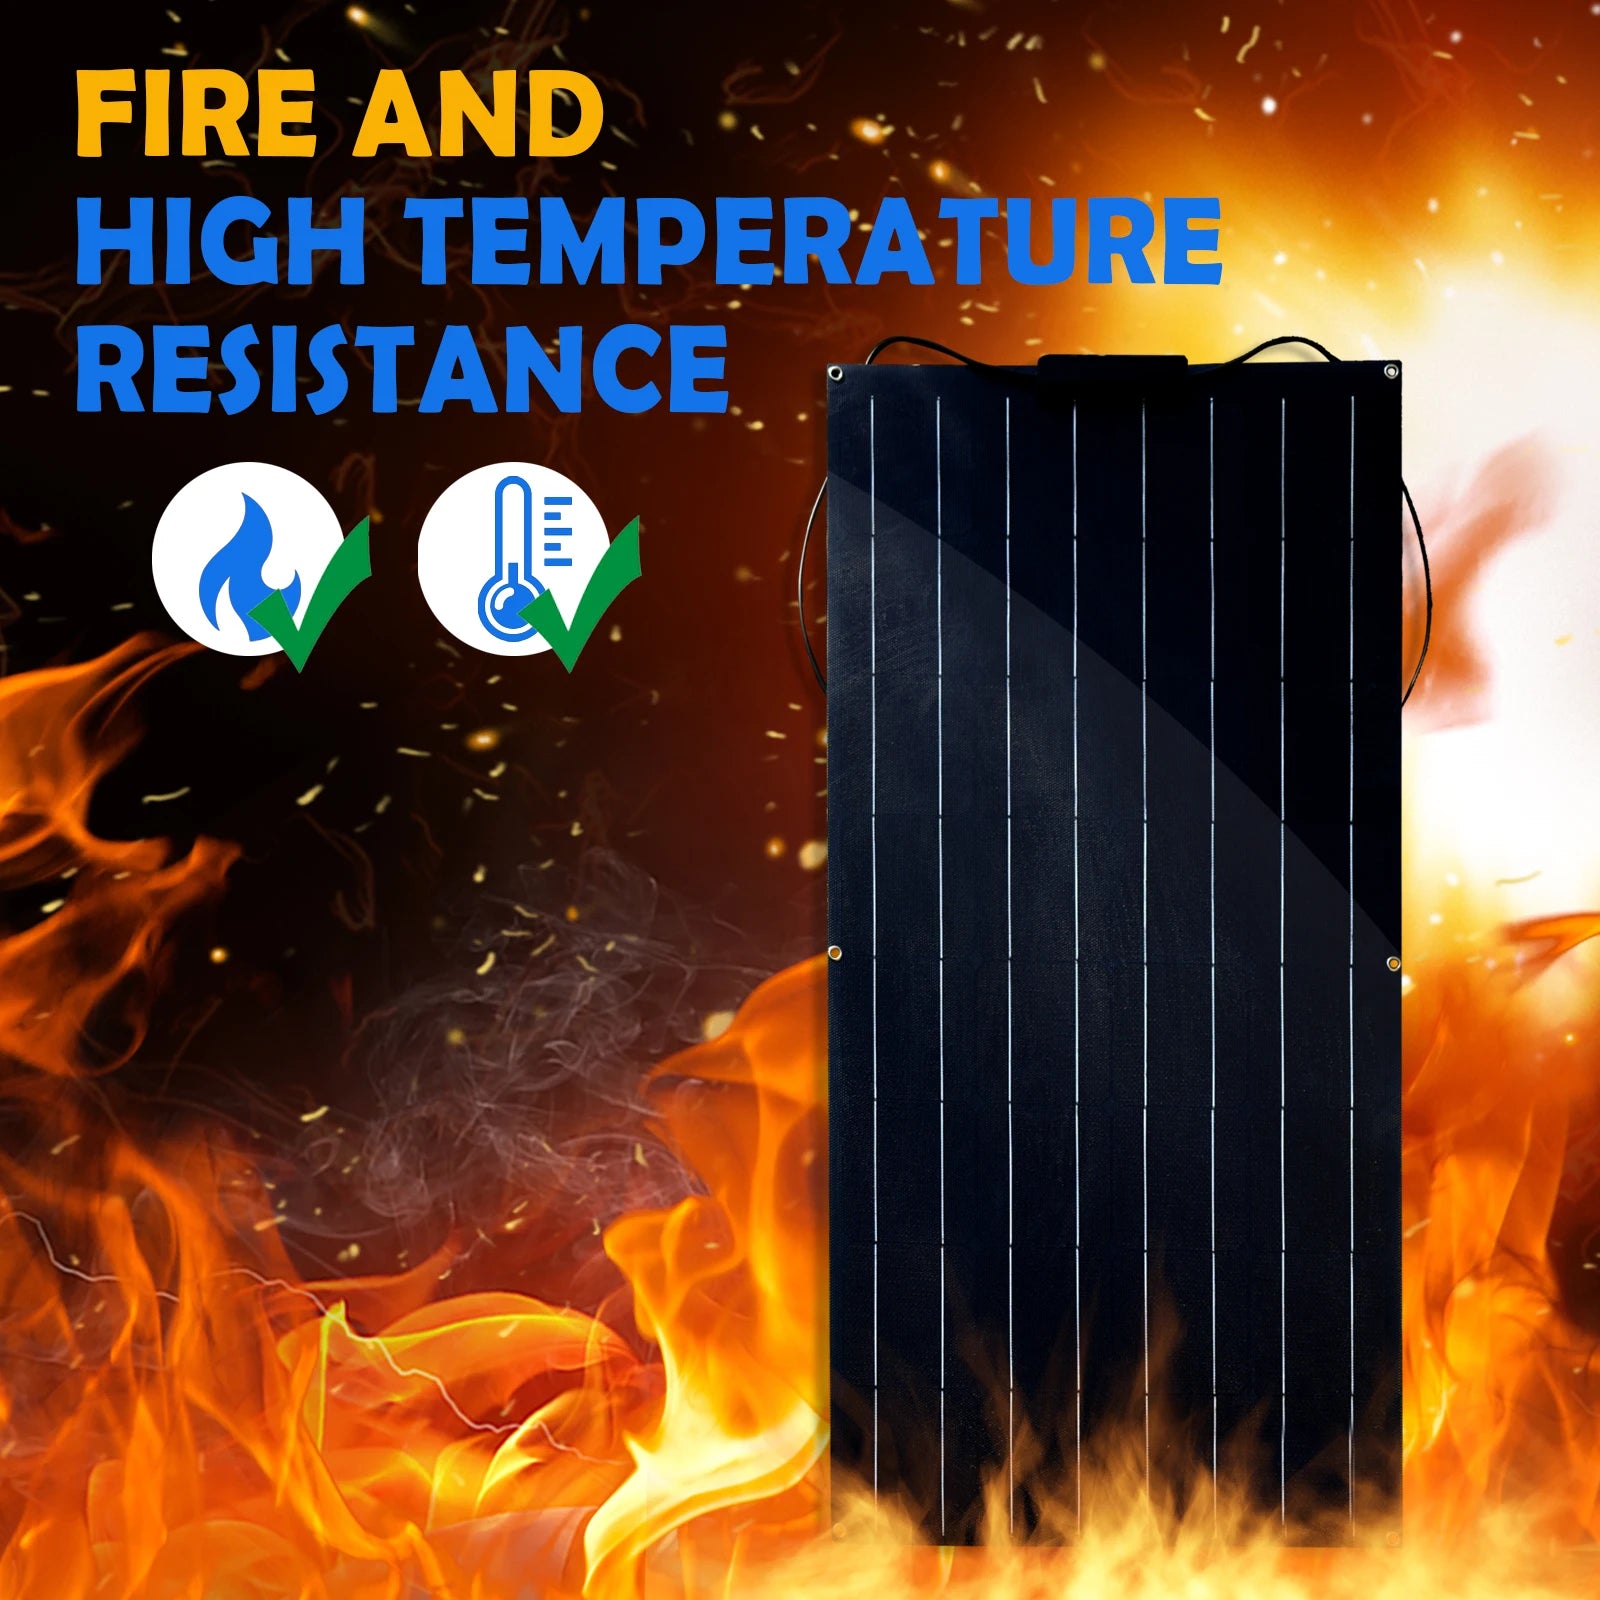 Fire-resistant and high-temperature tolerant